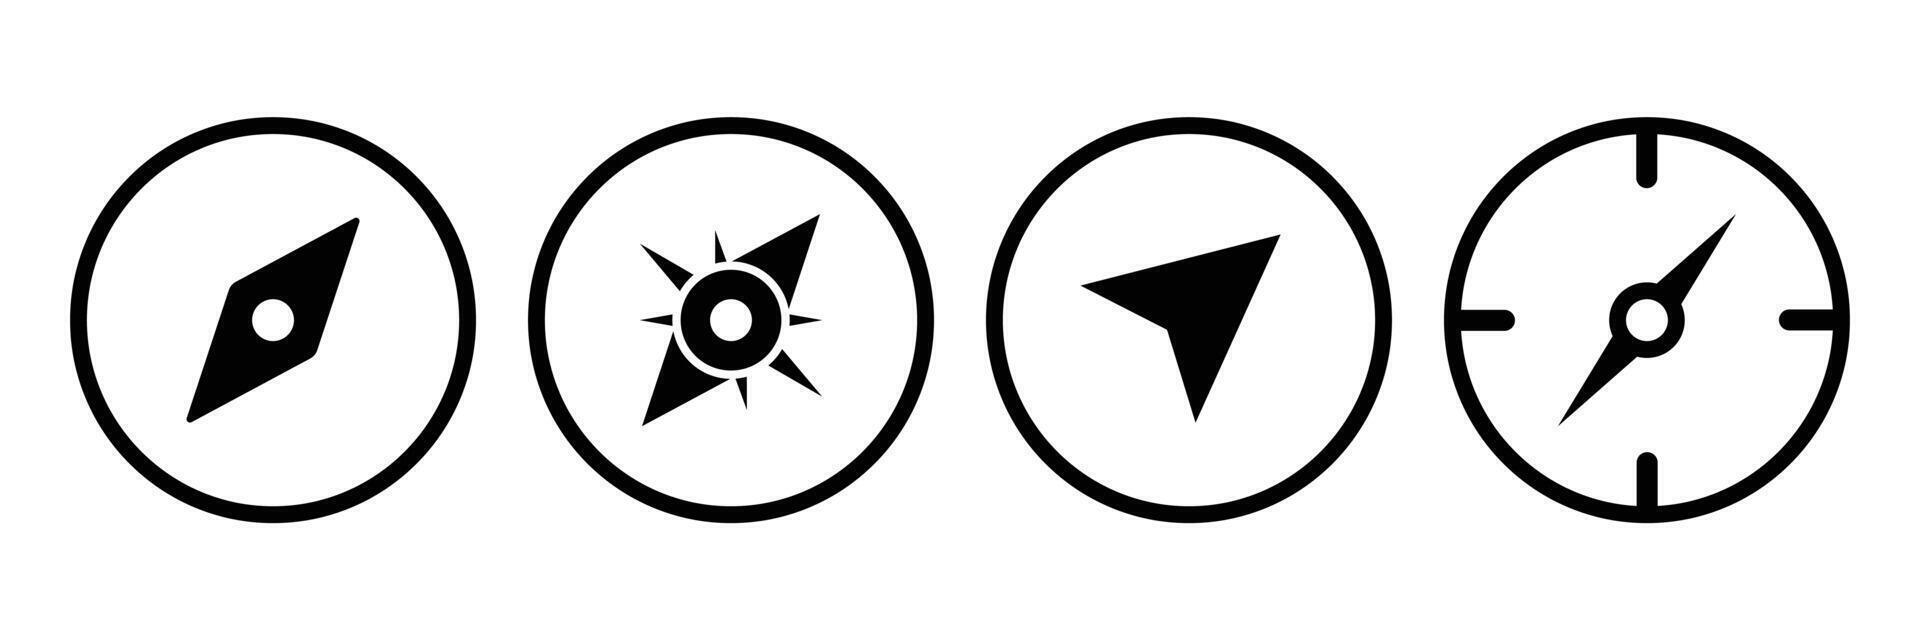 Set of direction compass icons collection. vector